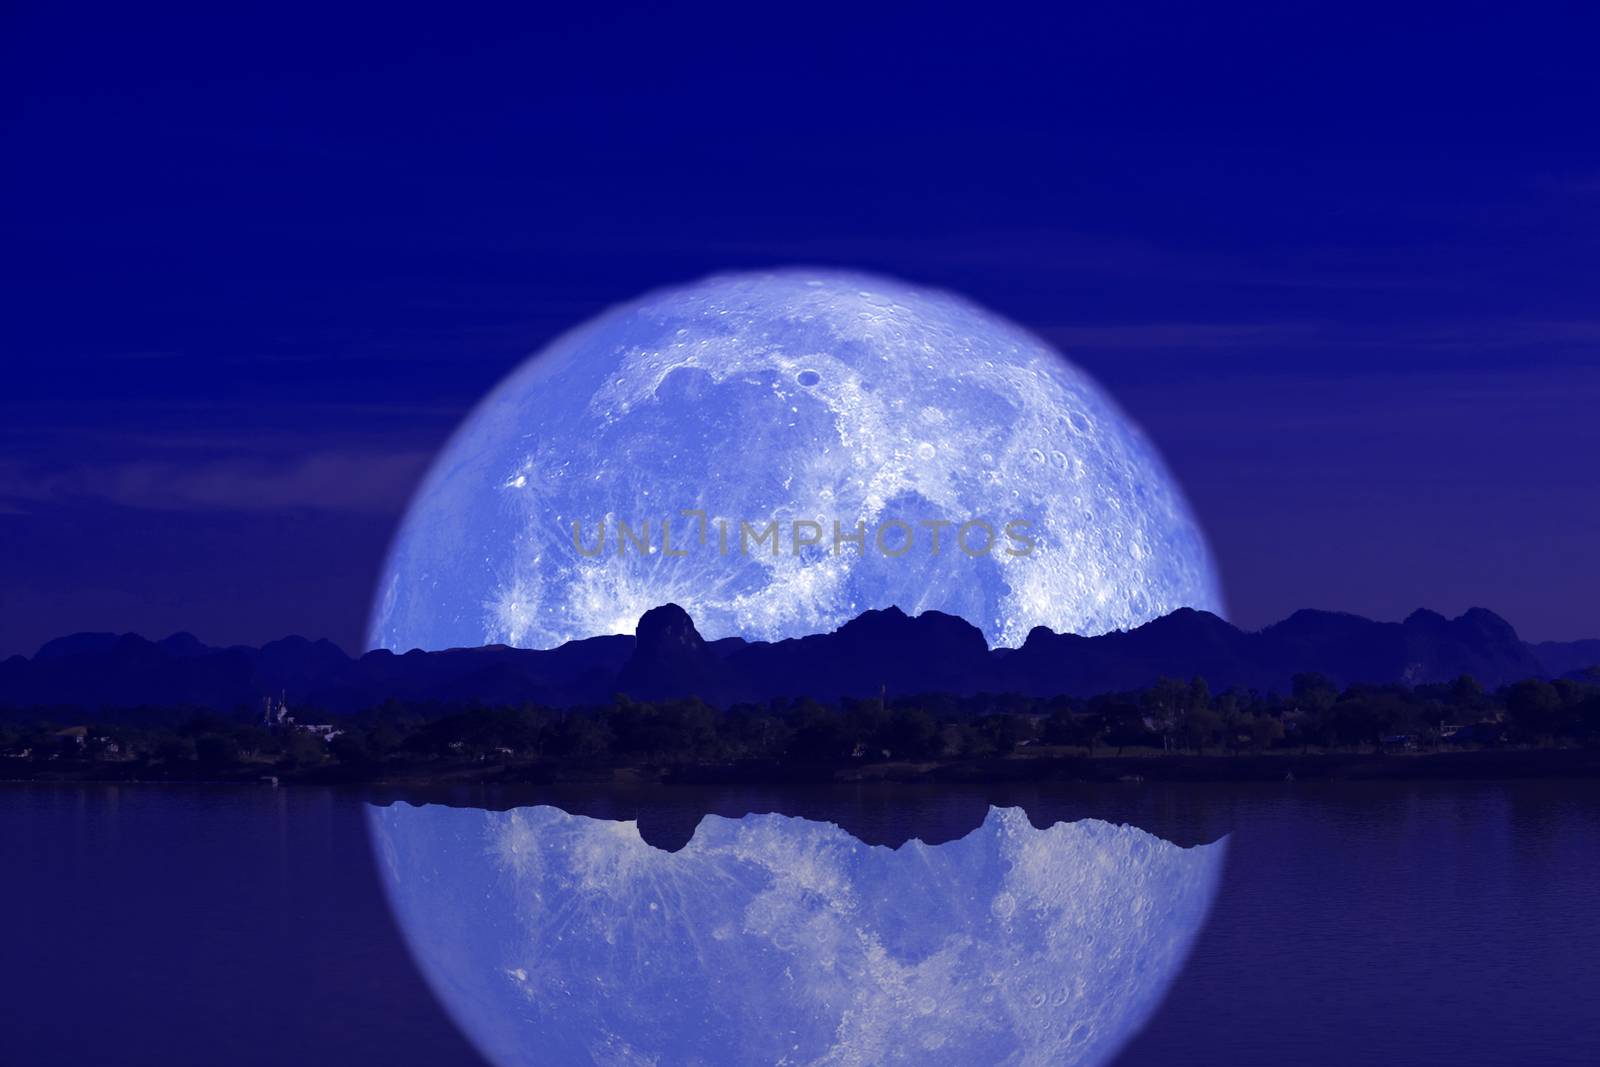 full milk moon back on silhouette mountain and reflection on river night sky, Elements of this image furnished by NASA